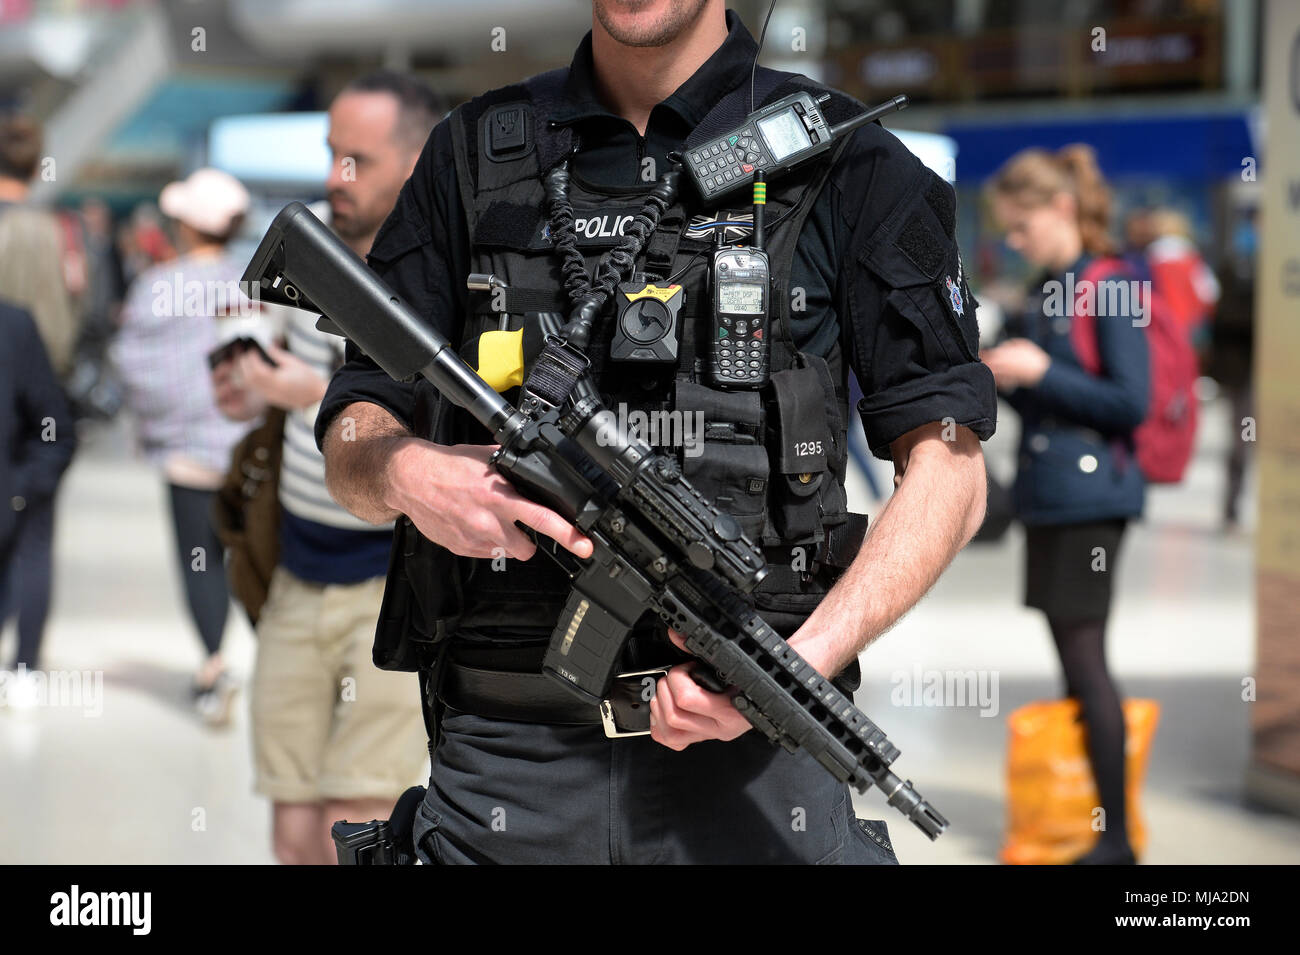 A firearms officer patrolling at Waterloo Station in London, where people will be travelling from to watch the royal wedding. Stock Photo